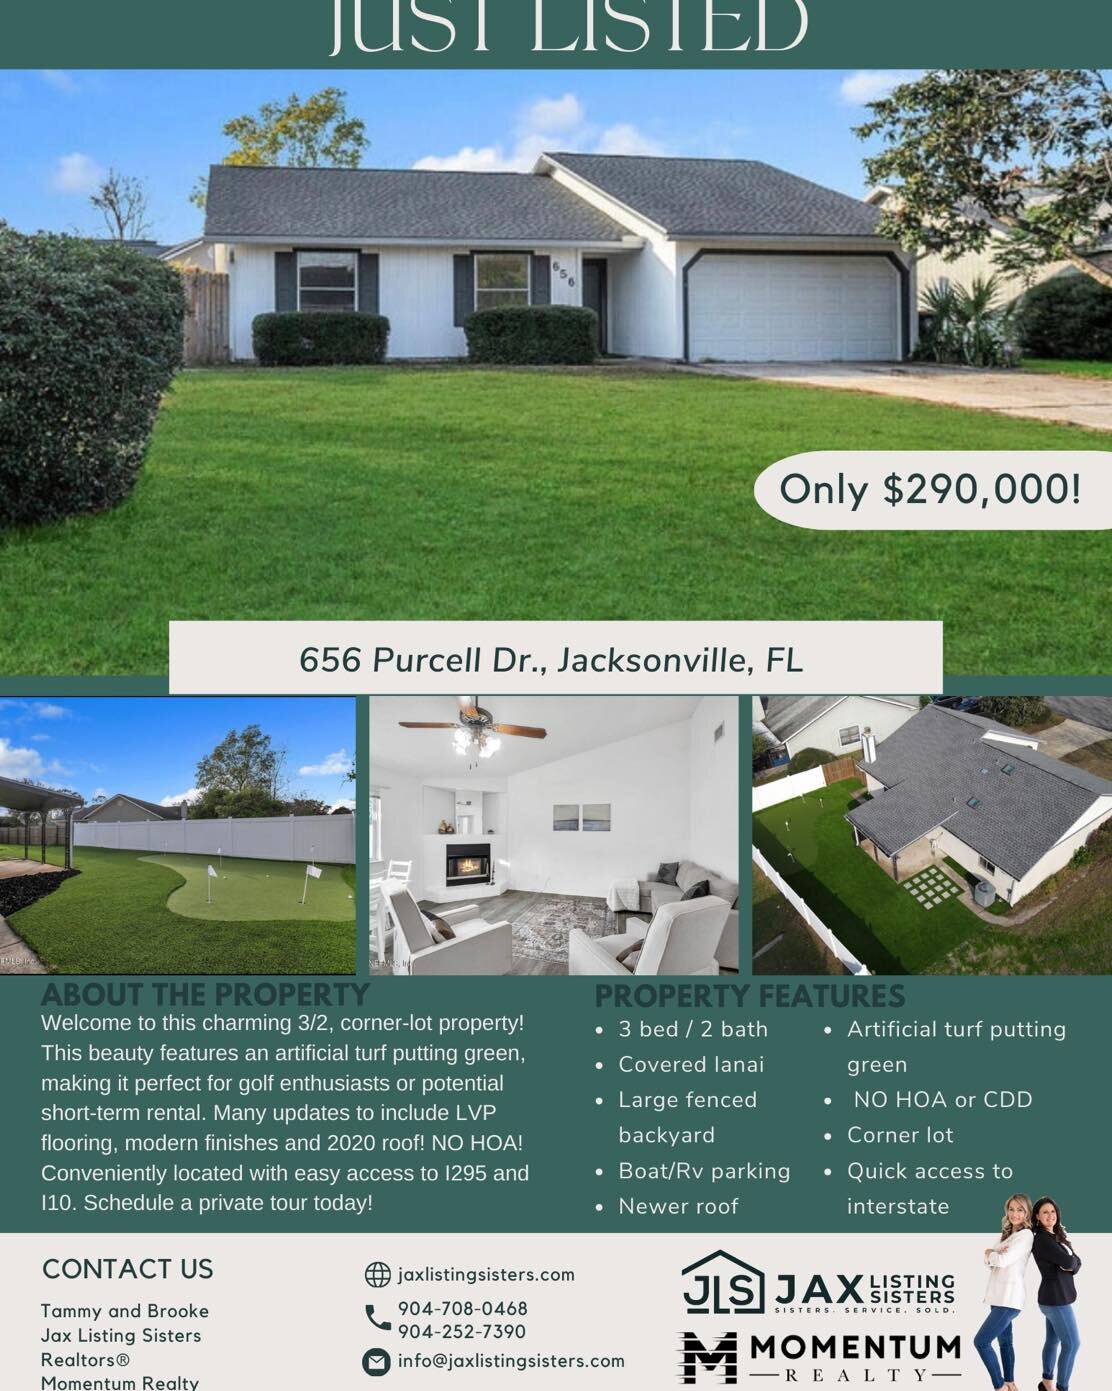 Check out JLS&rsquo; newest listing 🏡

This cutie features an amazing artificial turf, 5-hole putting green ⛳️

Super convenient to I-295 and I-10 so quick commute to all over the city 🚙 

Call us TODAY to schedule a tour 🤩